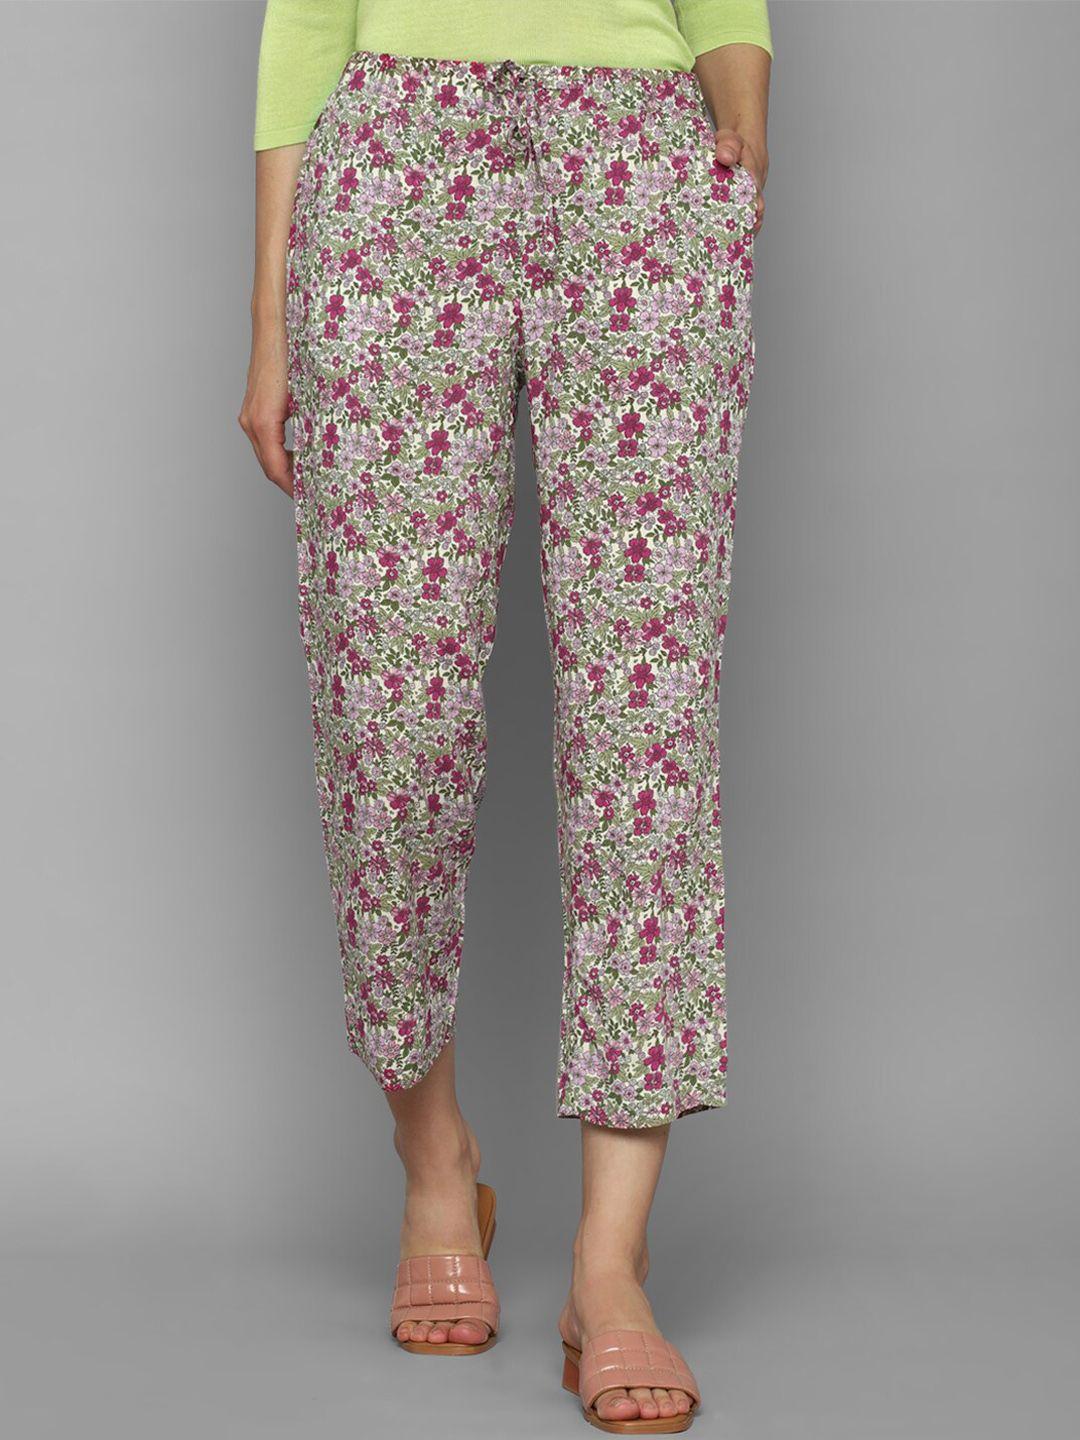 allen solly woman women multicoloured floral printed trousers